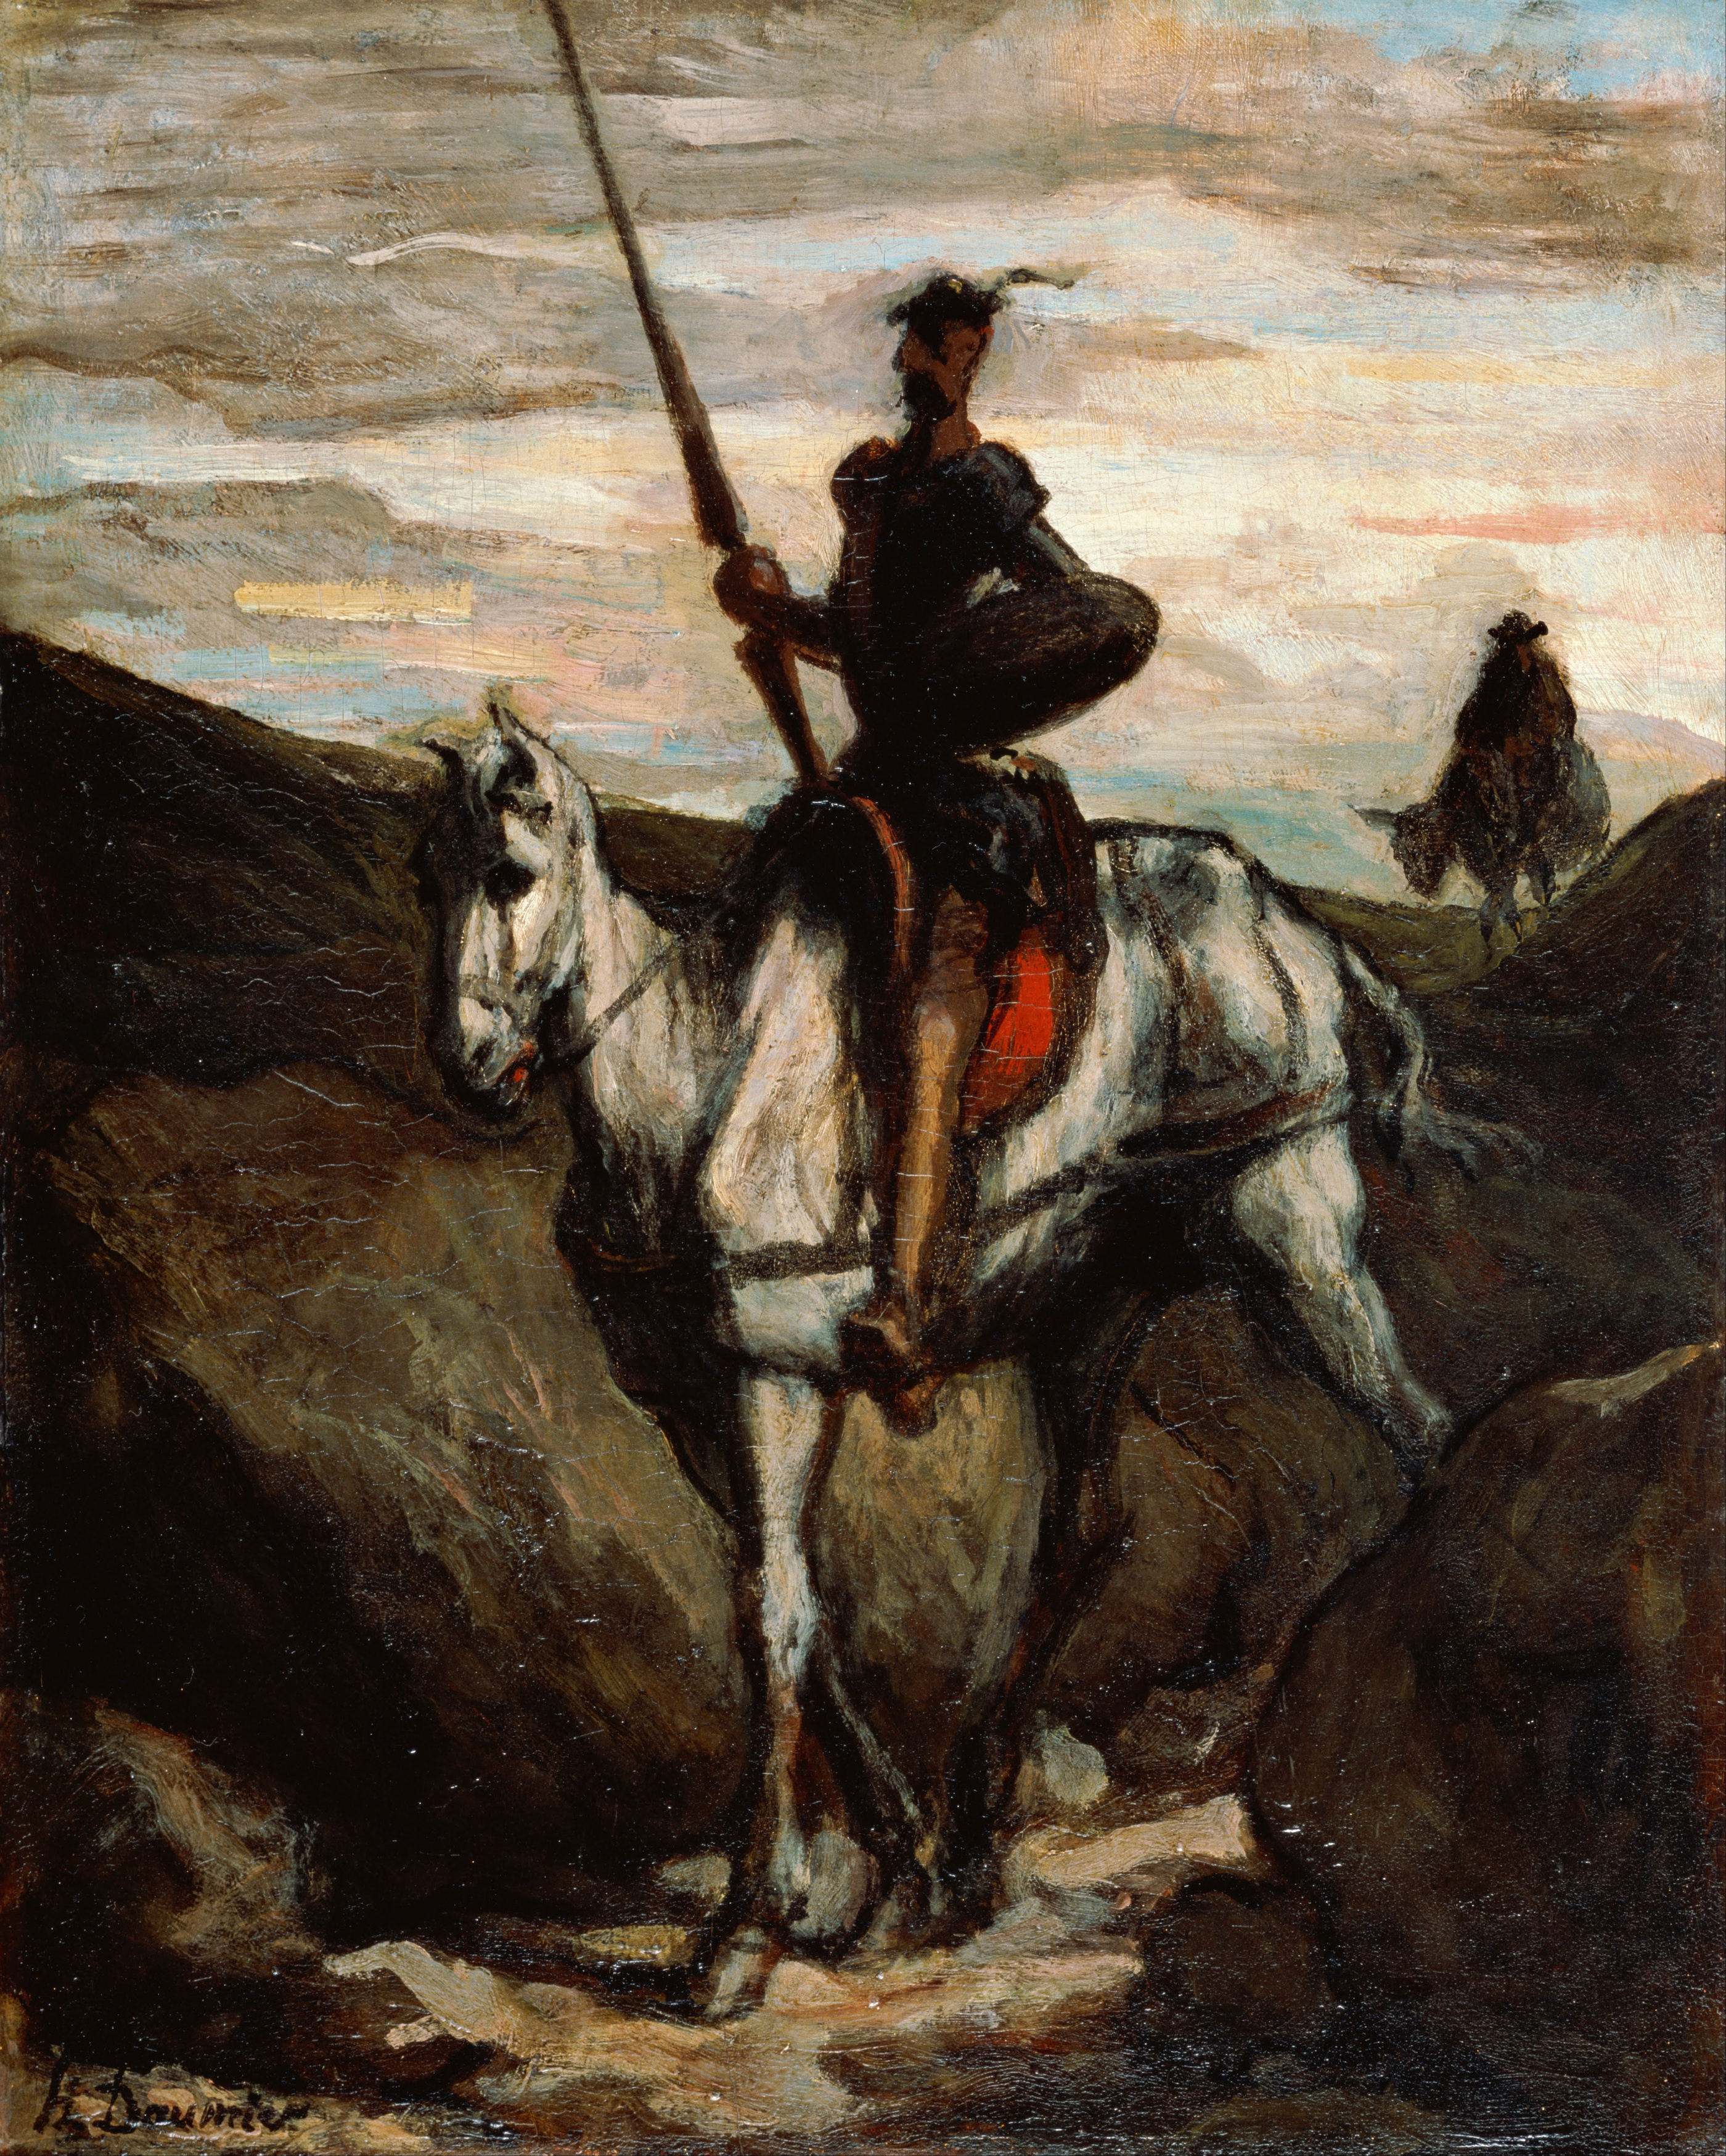 Don Quijote v horách by Honoré Daumier - cca 1850 - 312 x 396 cm 